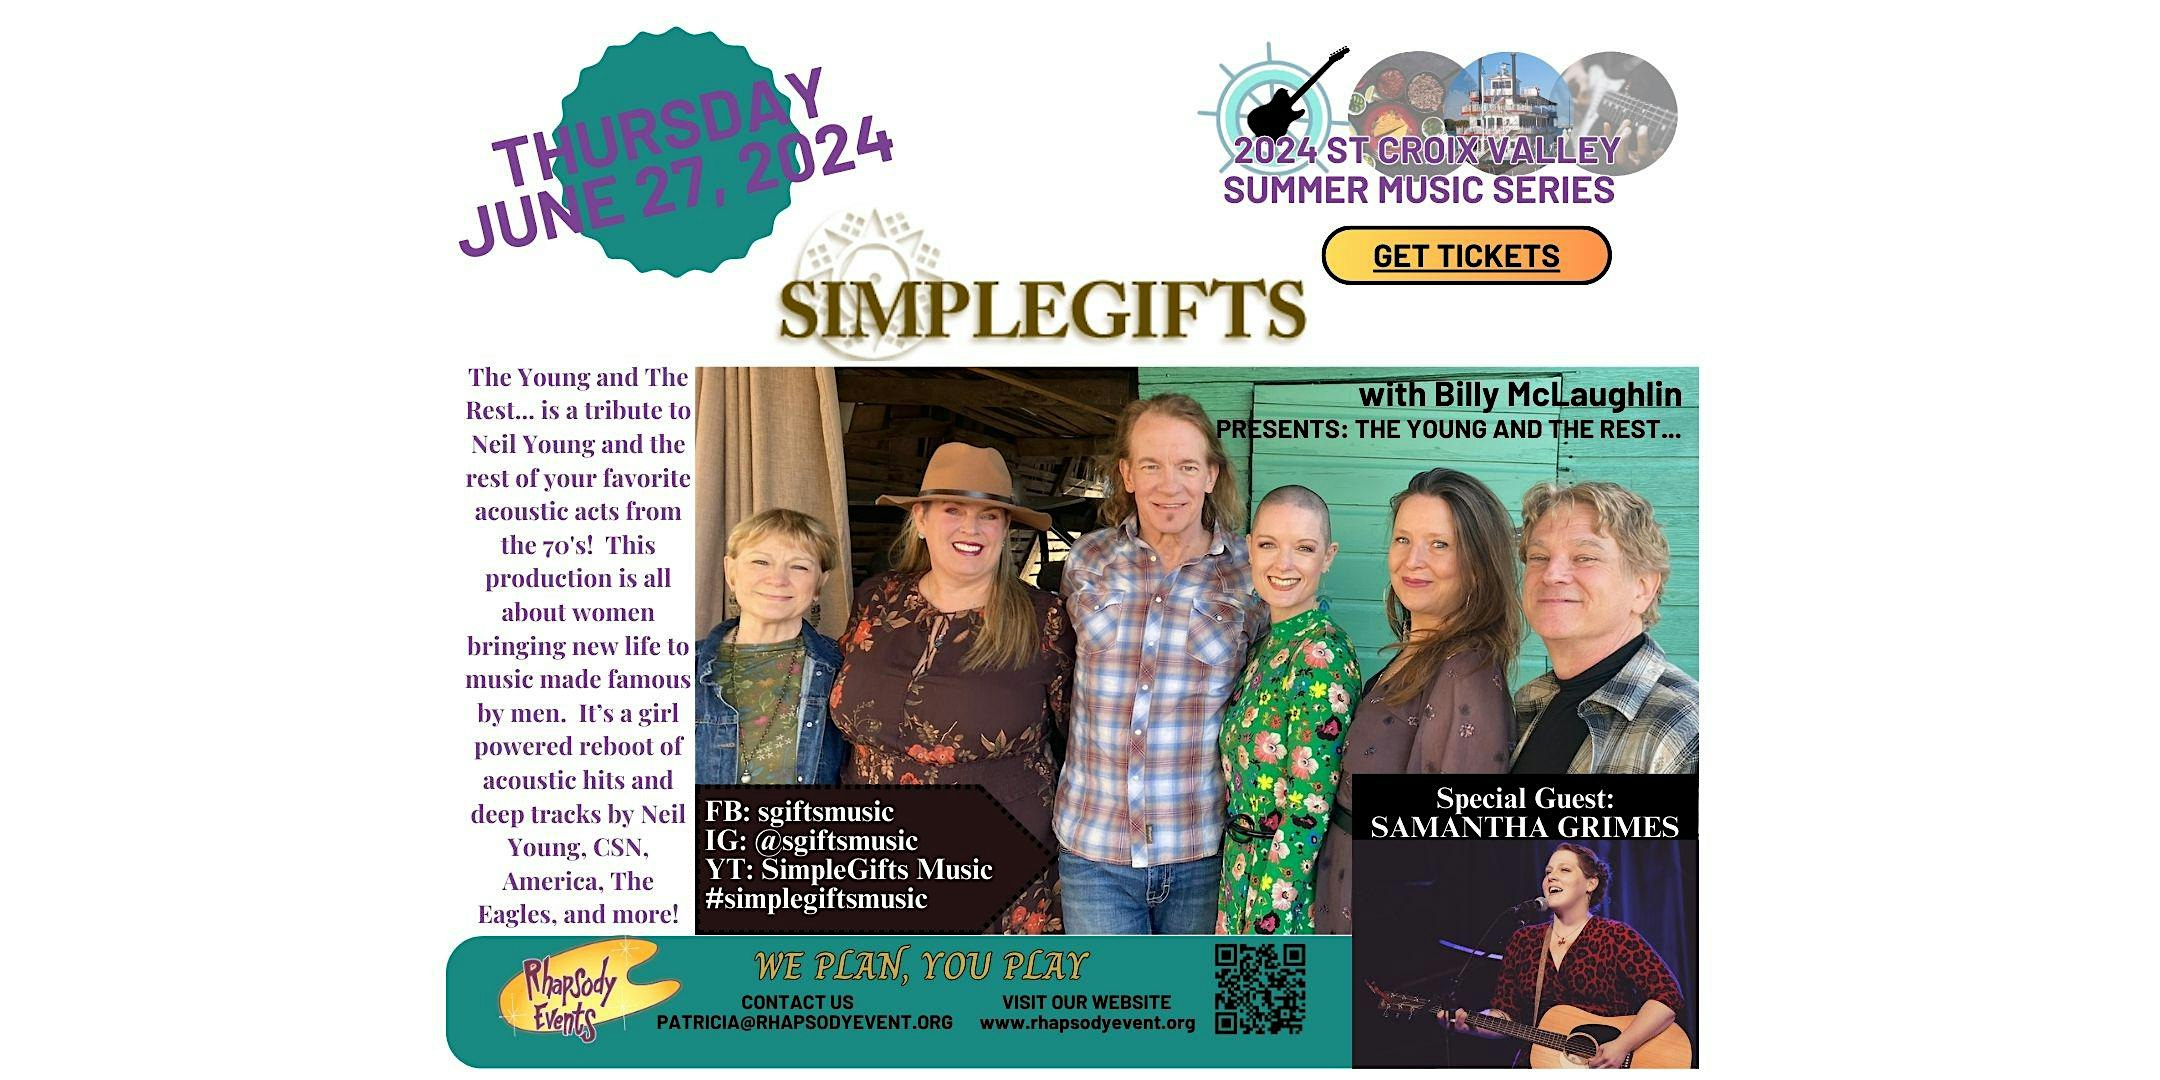 Simple Gifts with Billy McLaughlin\/Samantha Grimes - Dinner Cruise!